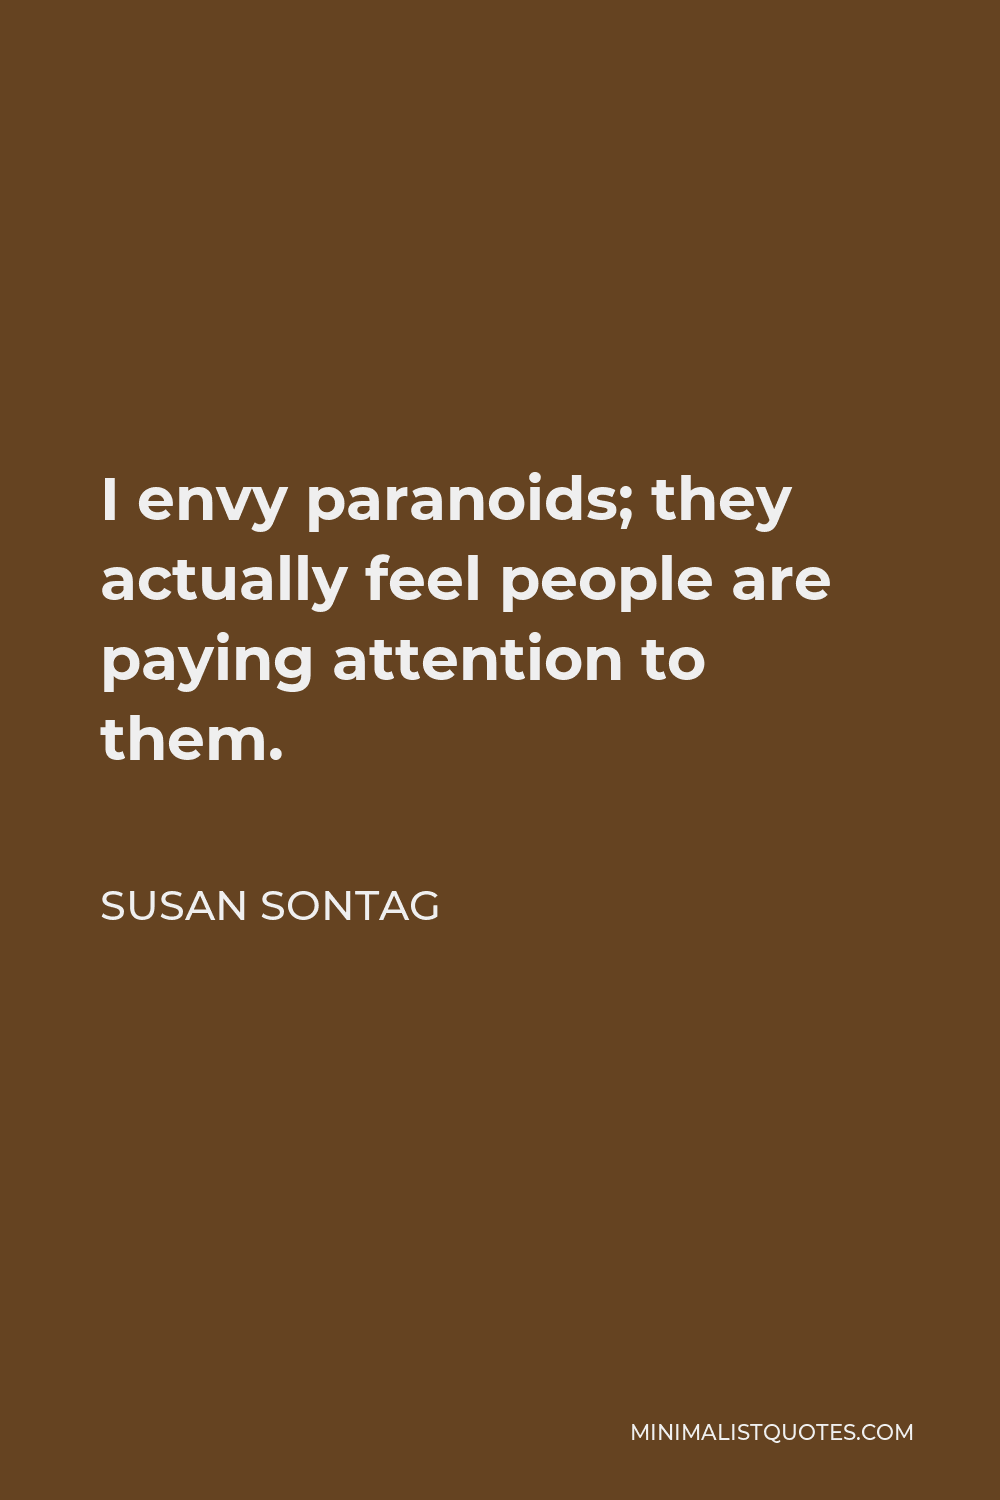 Susan Sontag Quote - I envy paranoids; they actually feel people are paying attention to them.